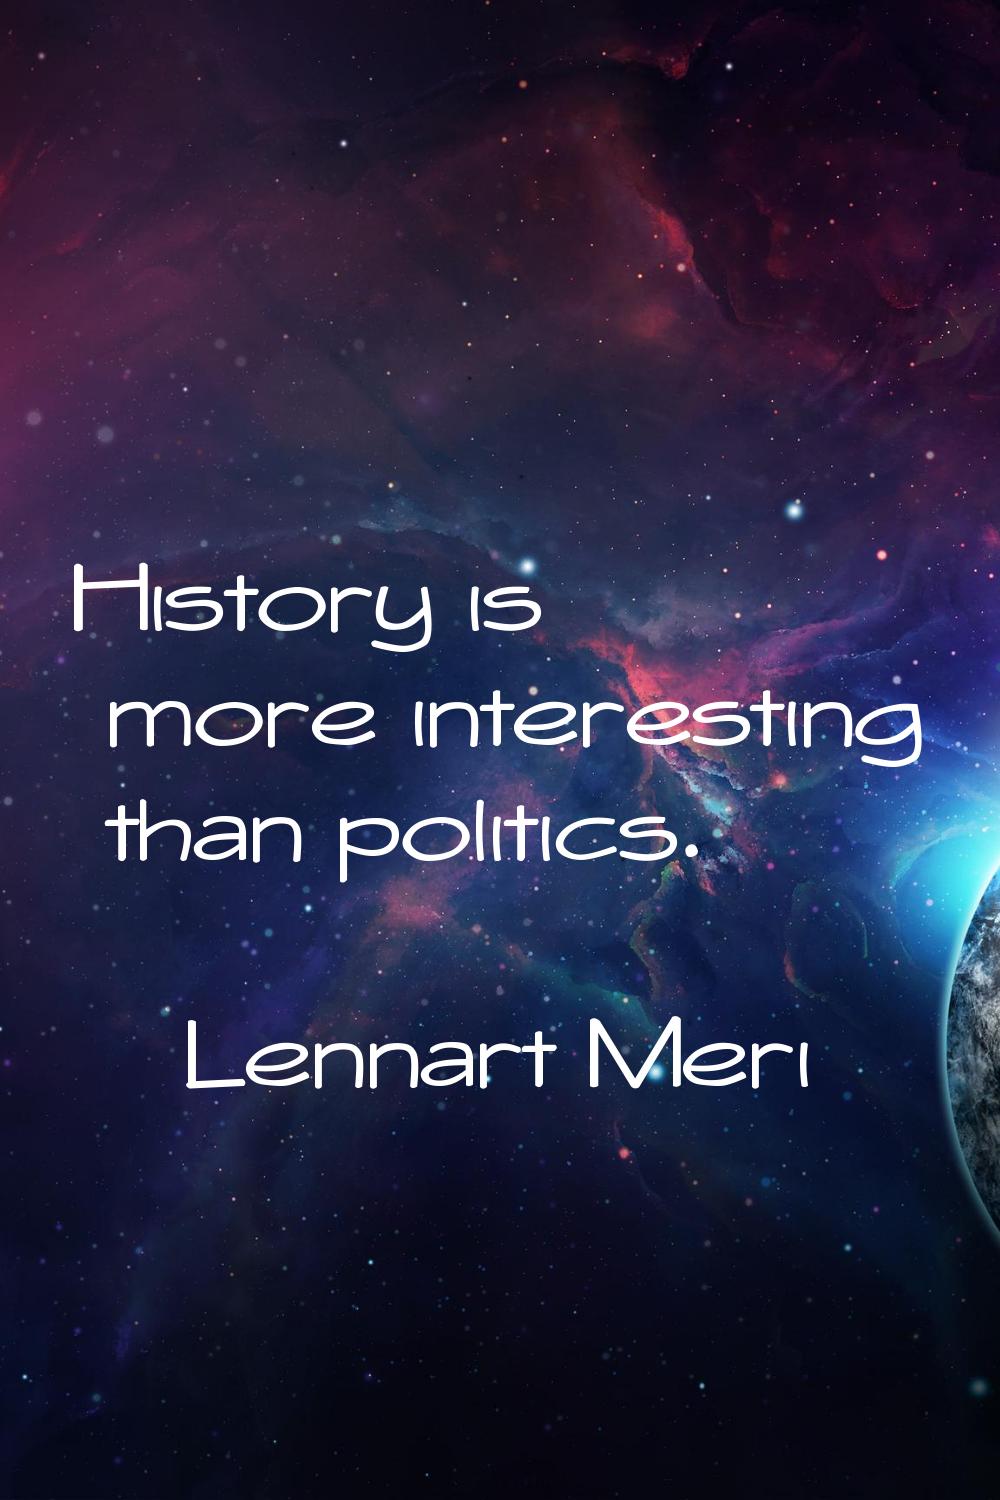 History is more interesting than politics.